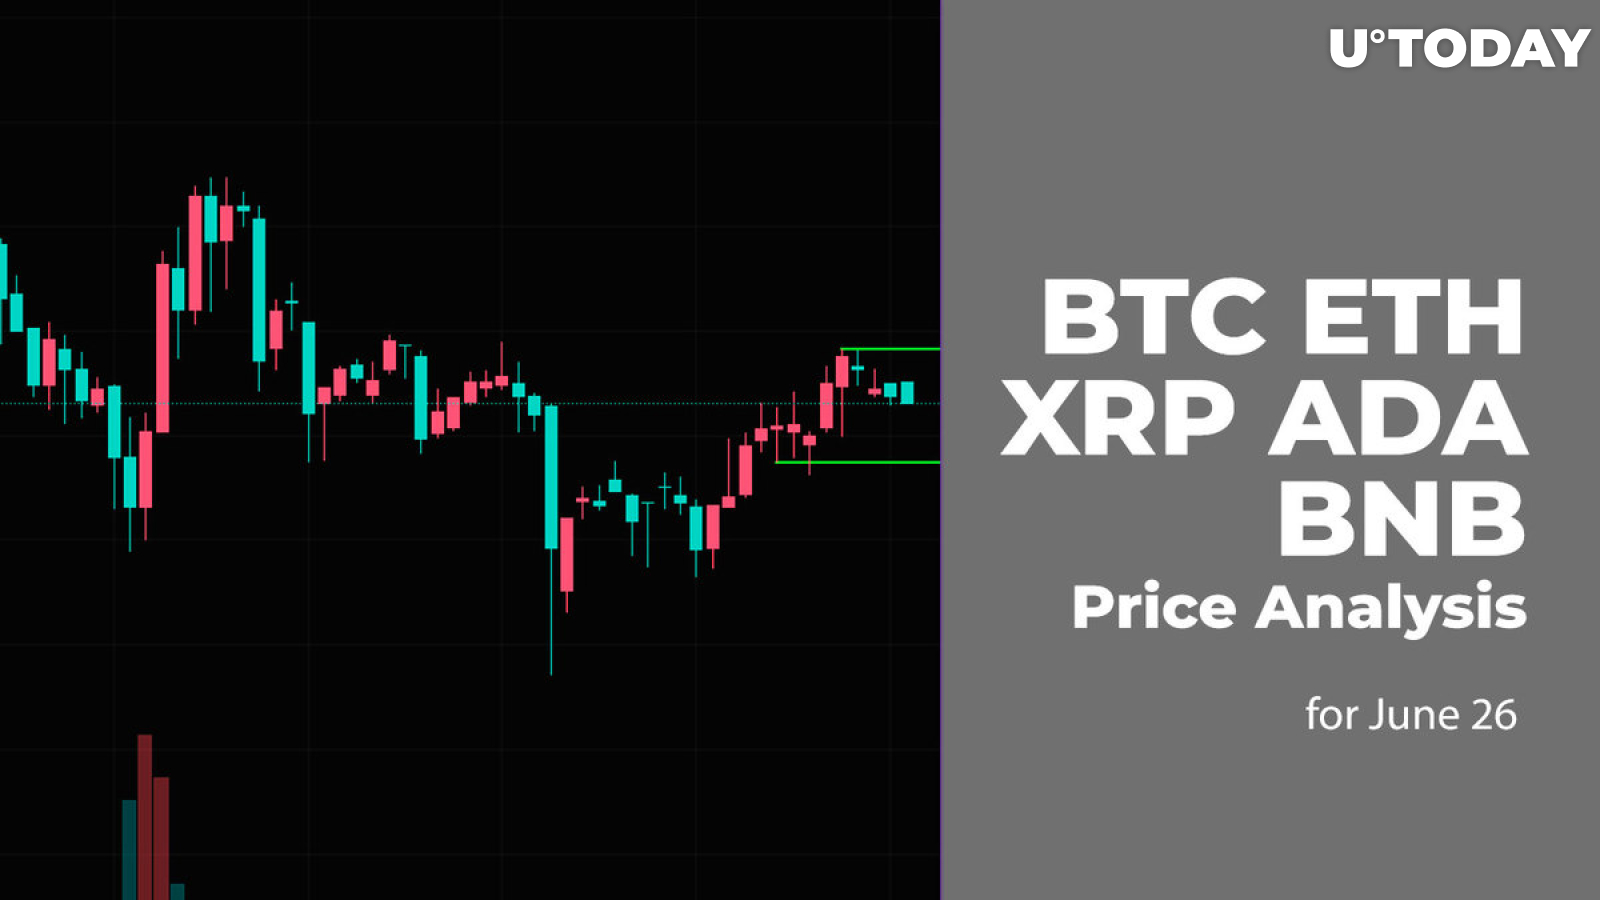 BTC, ETH, XRP, ADA and BNB Price Analysis for June 26